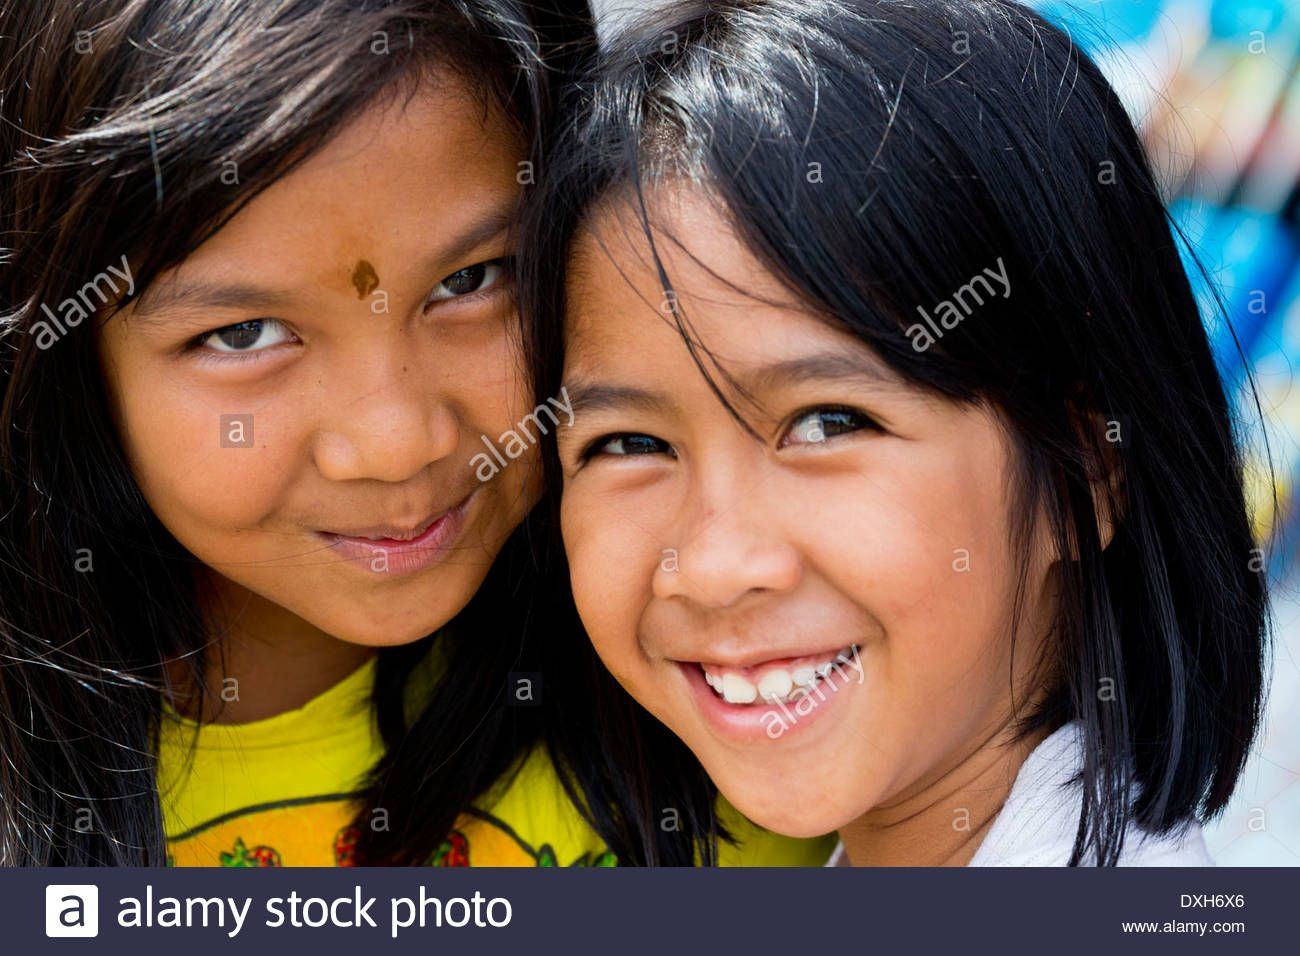 Indonesia young girls pic